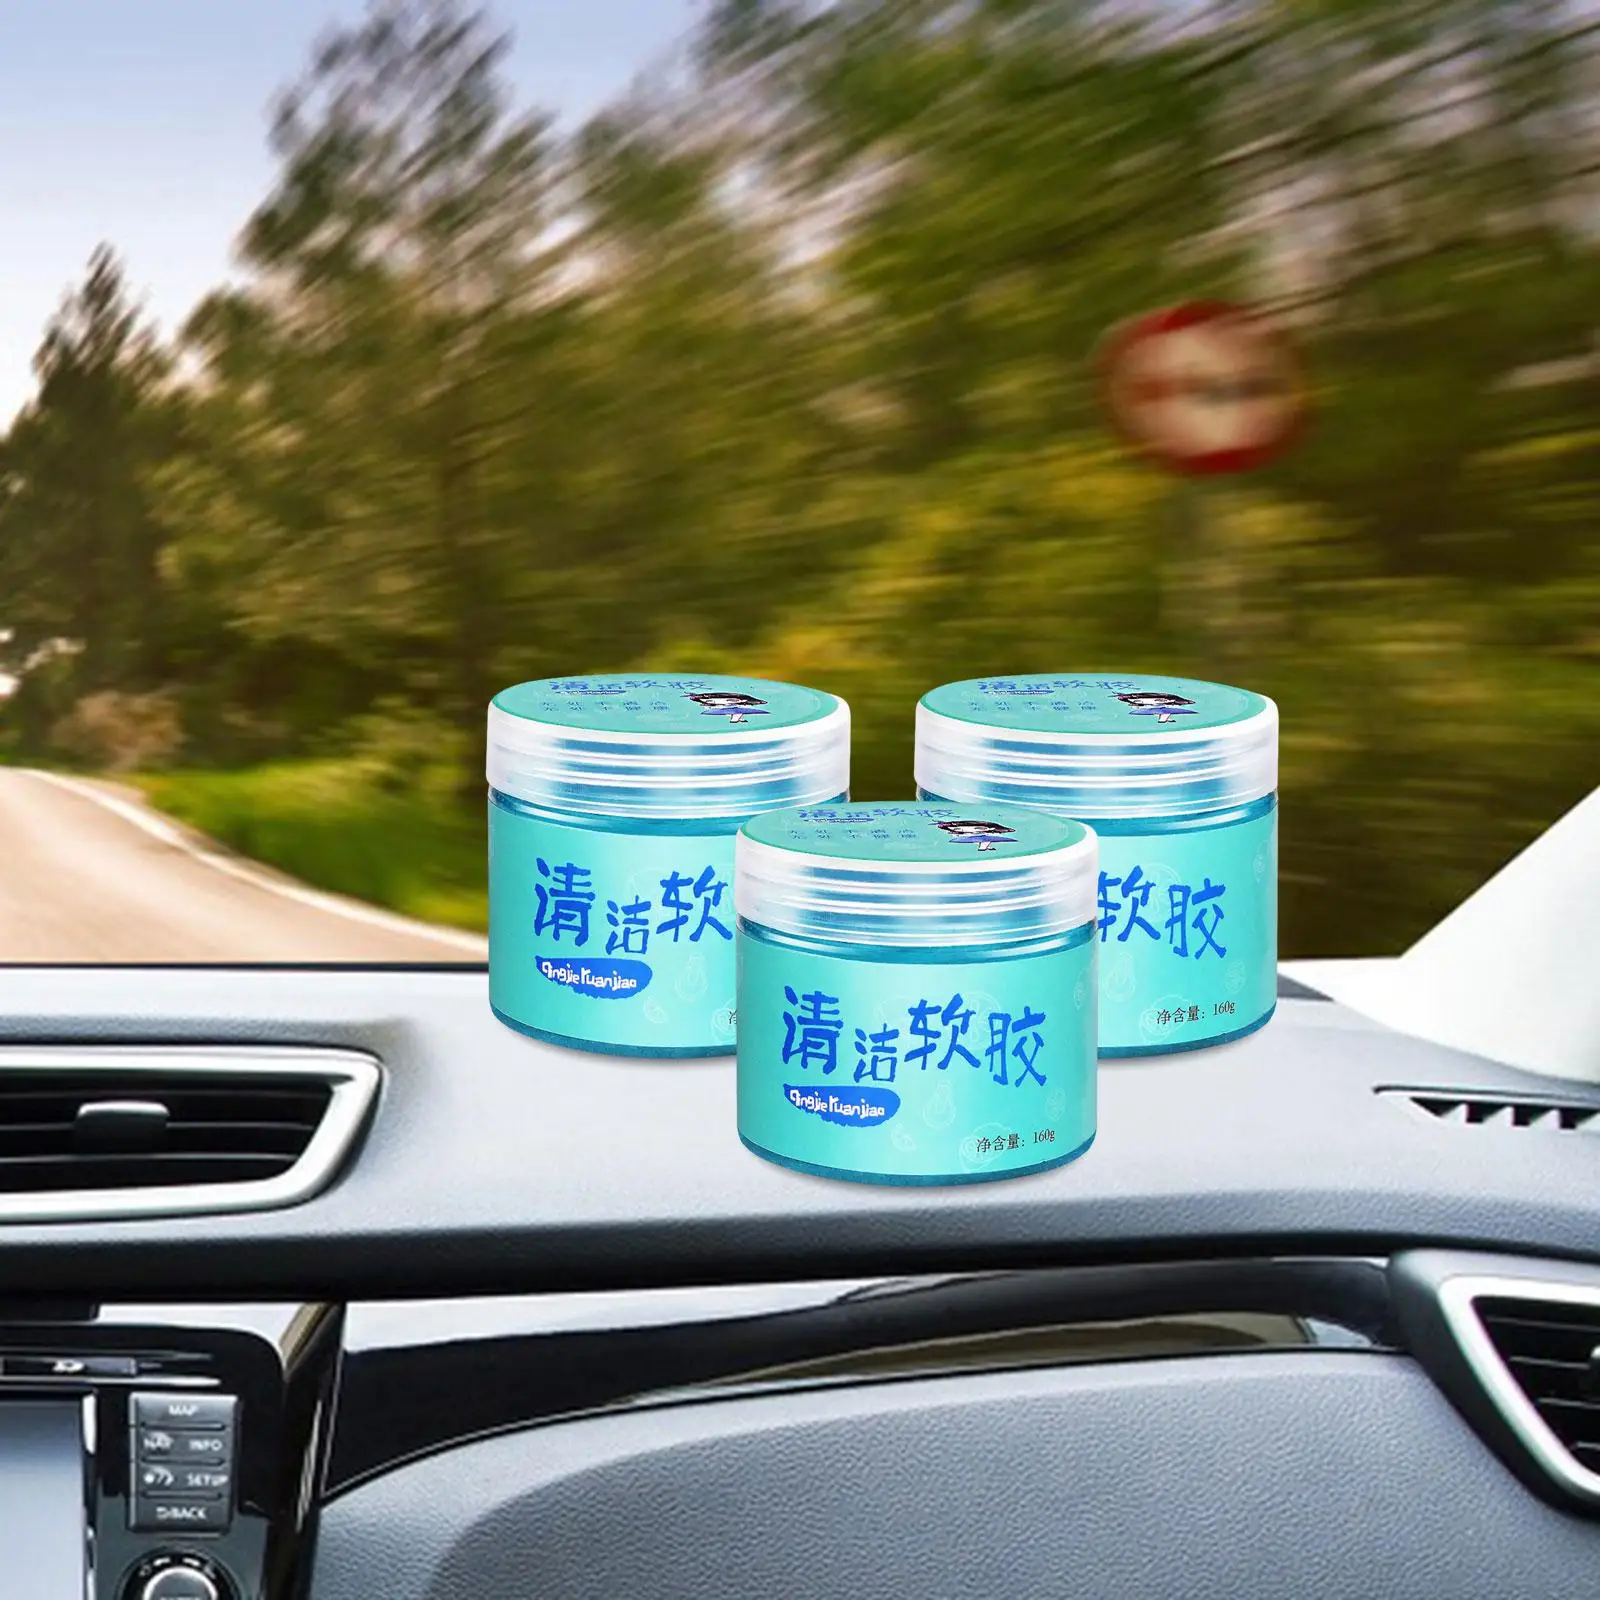 Gels,Universal Auto Detailing Tools, Car Dashboard Cleaner, Car Cleaner Putty Interior, Computer Dust Remover